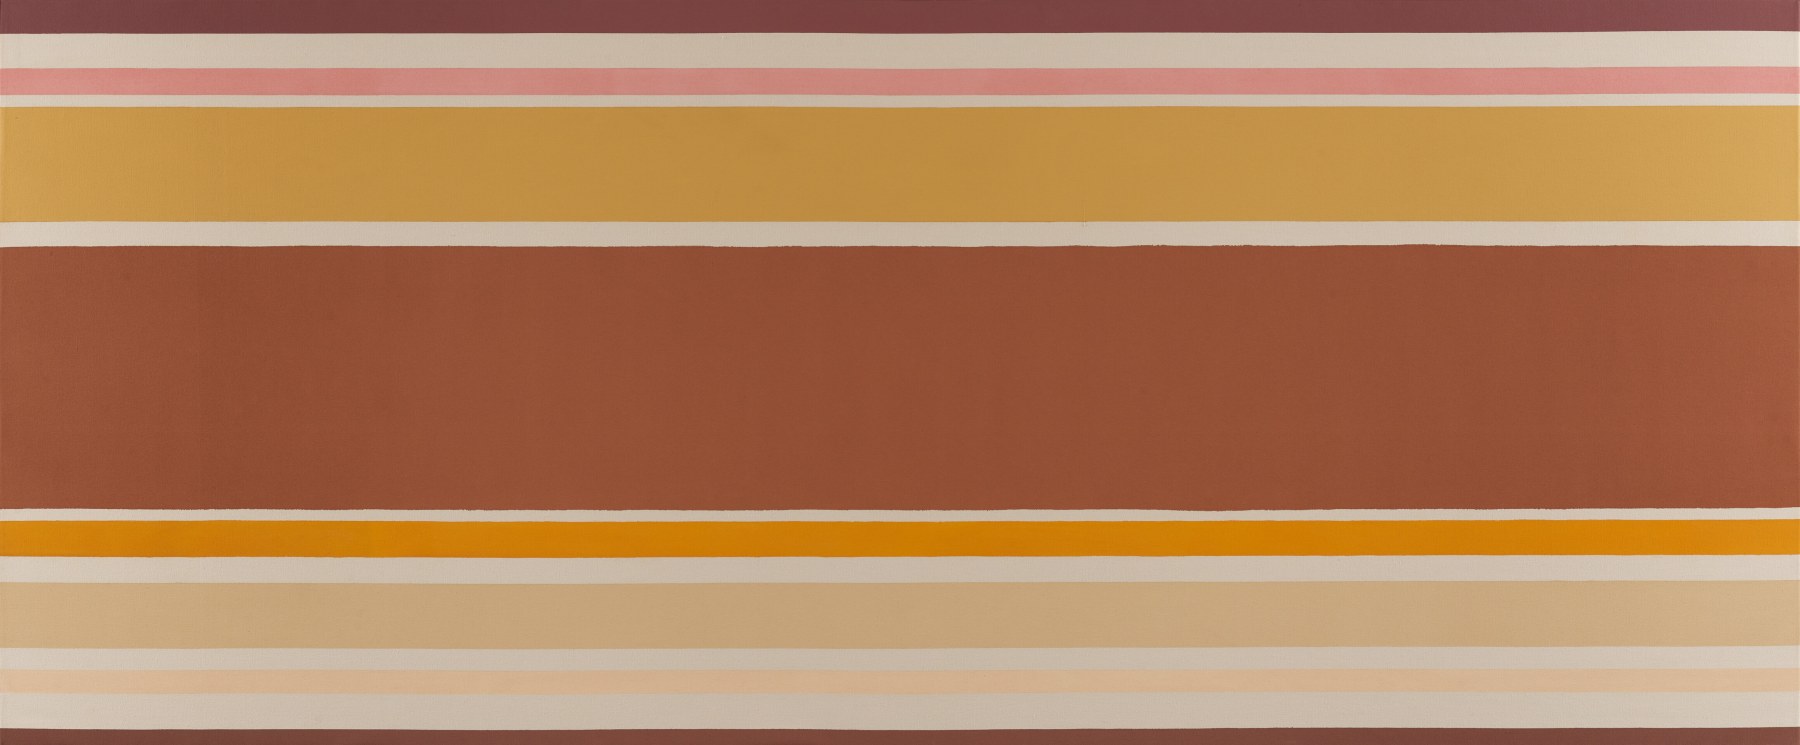 Umber

1968

Acrylic on canvas

57 1/16 x 137 3/16 inches

144.9 x 348.5cm